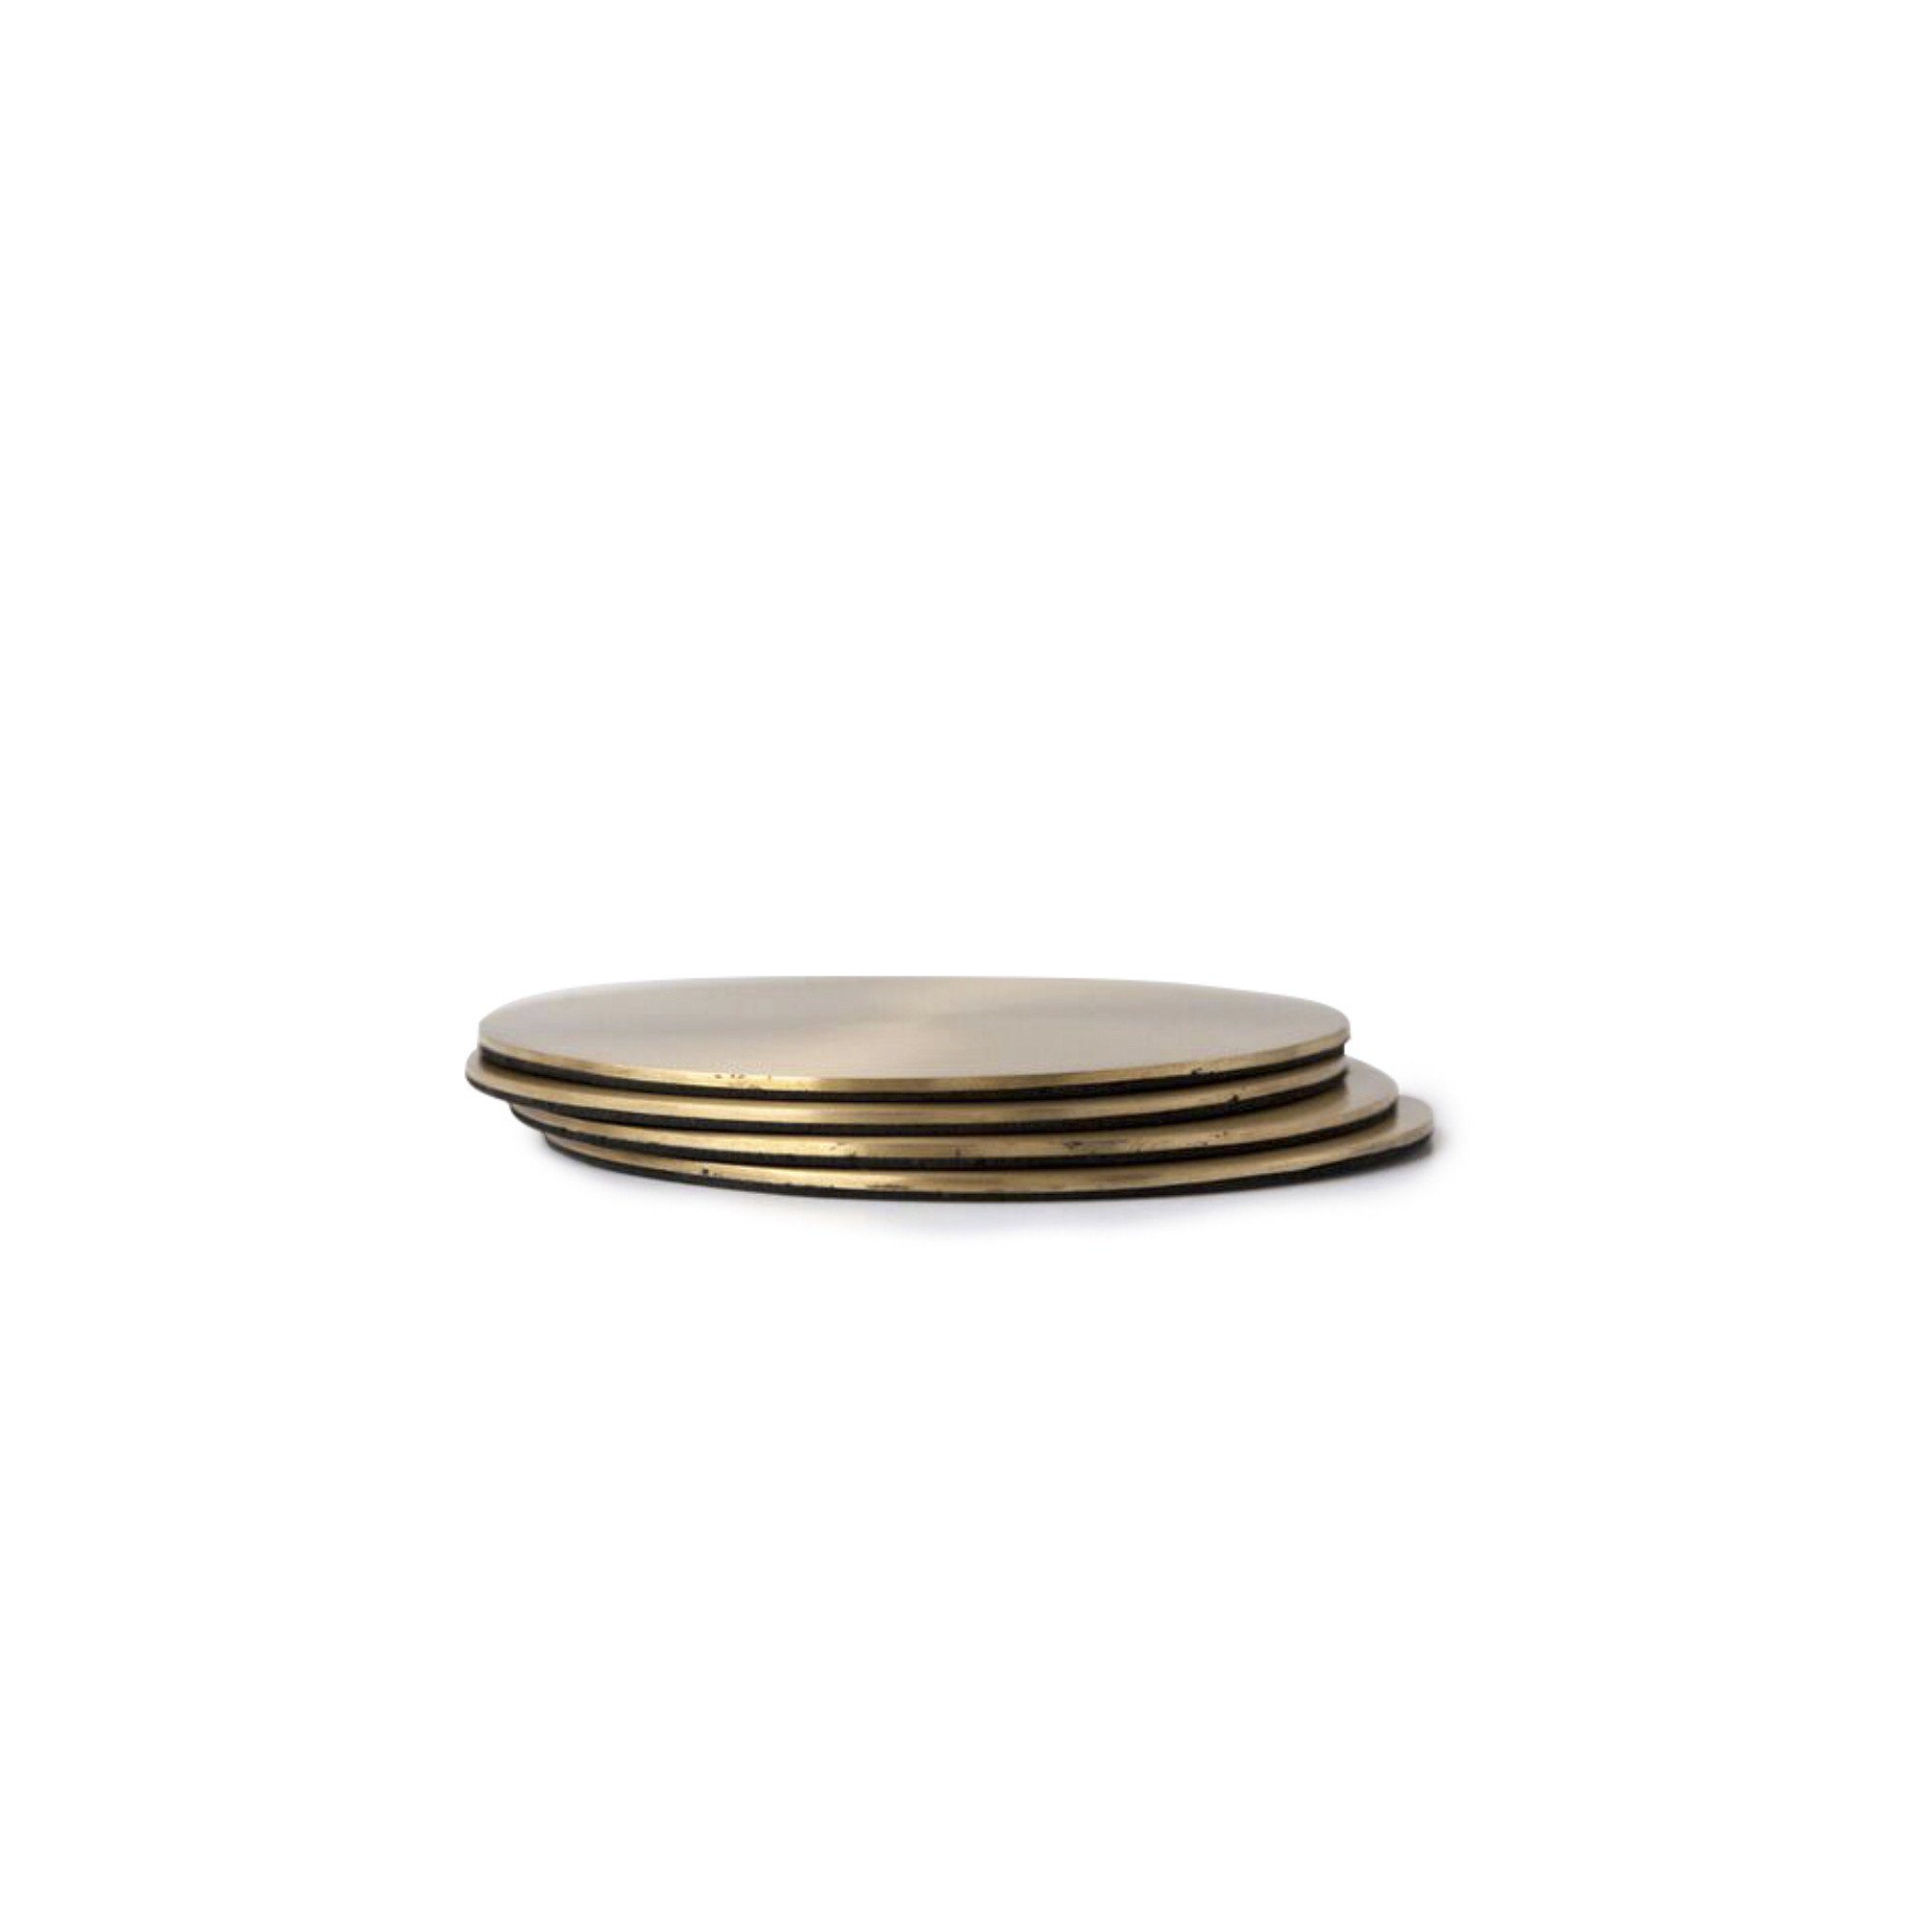 BEHR & CO Geo Circle Coasters, Brass - Set of Four